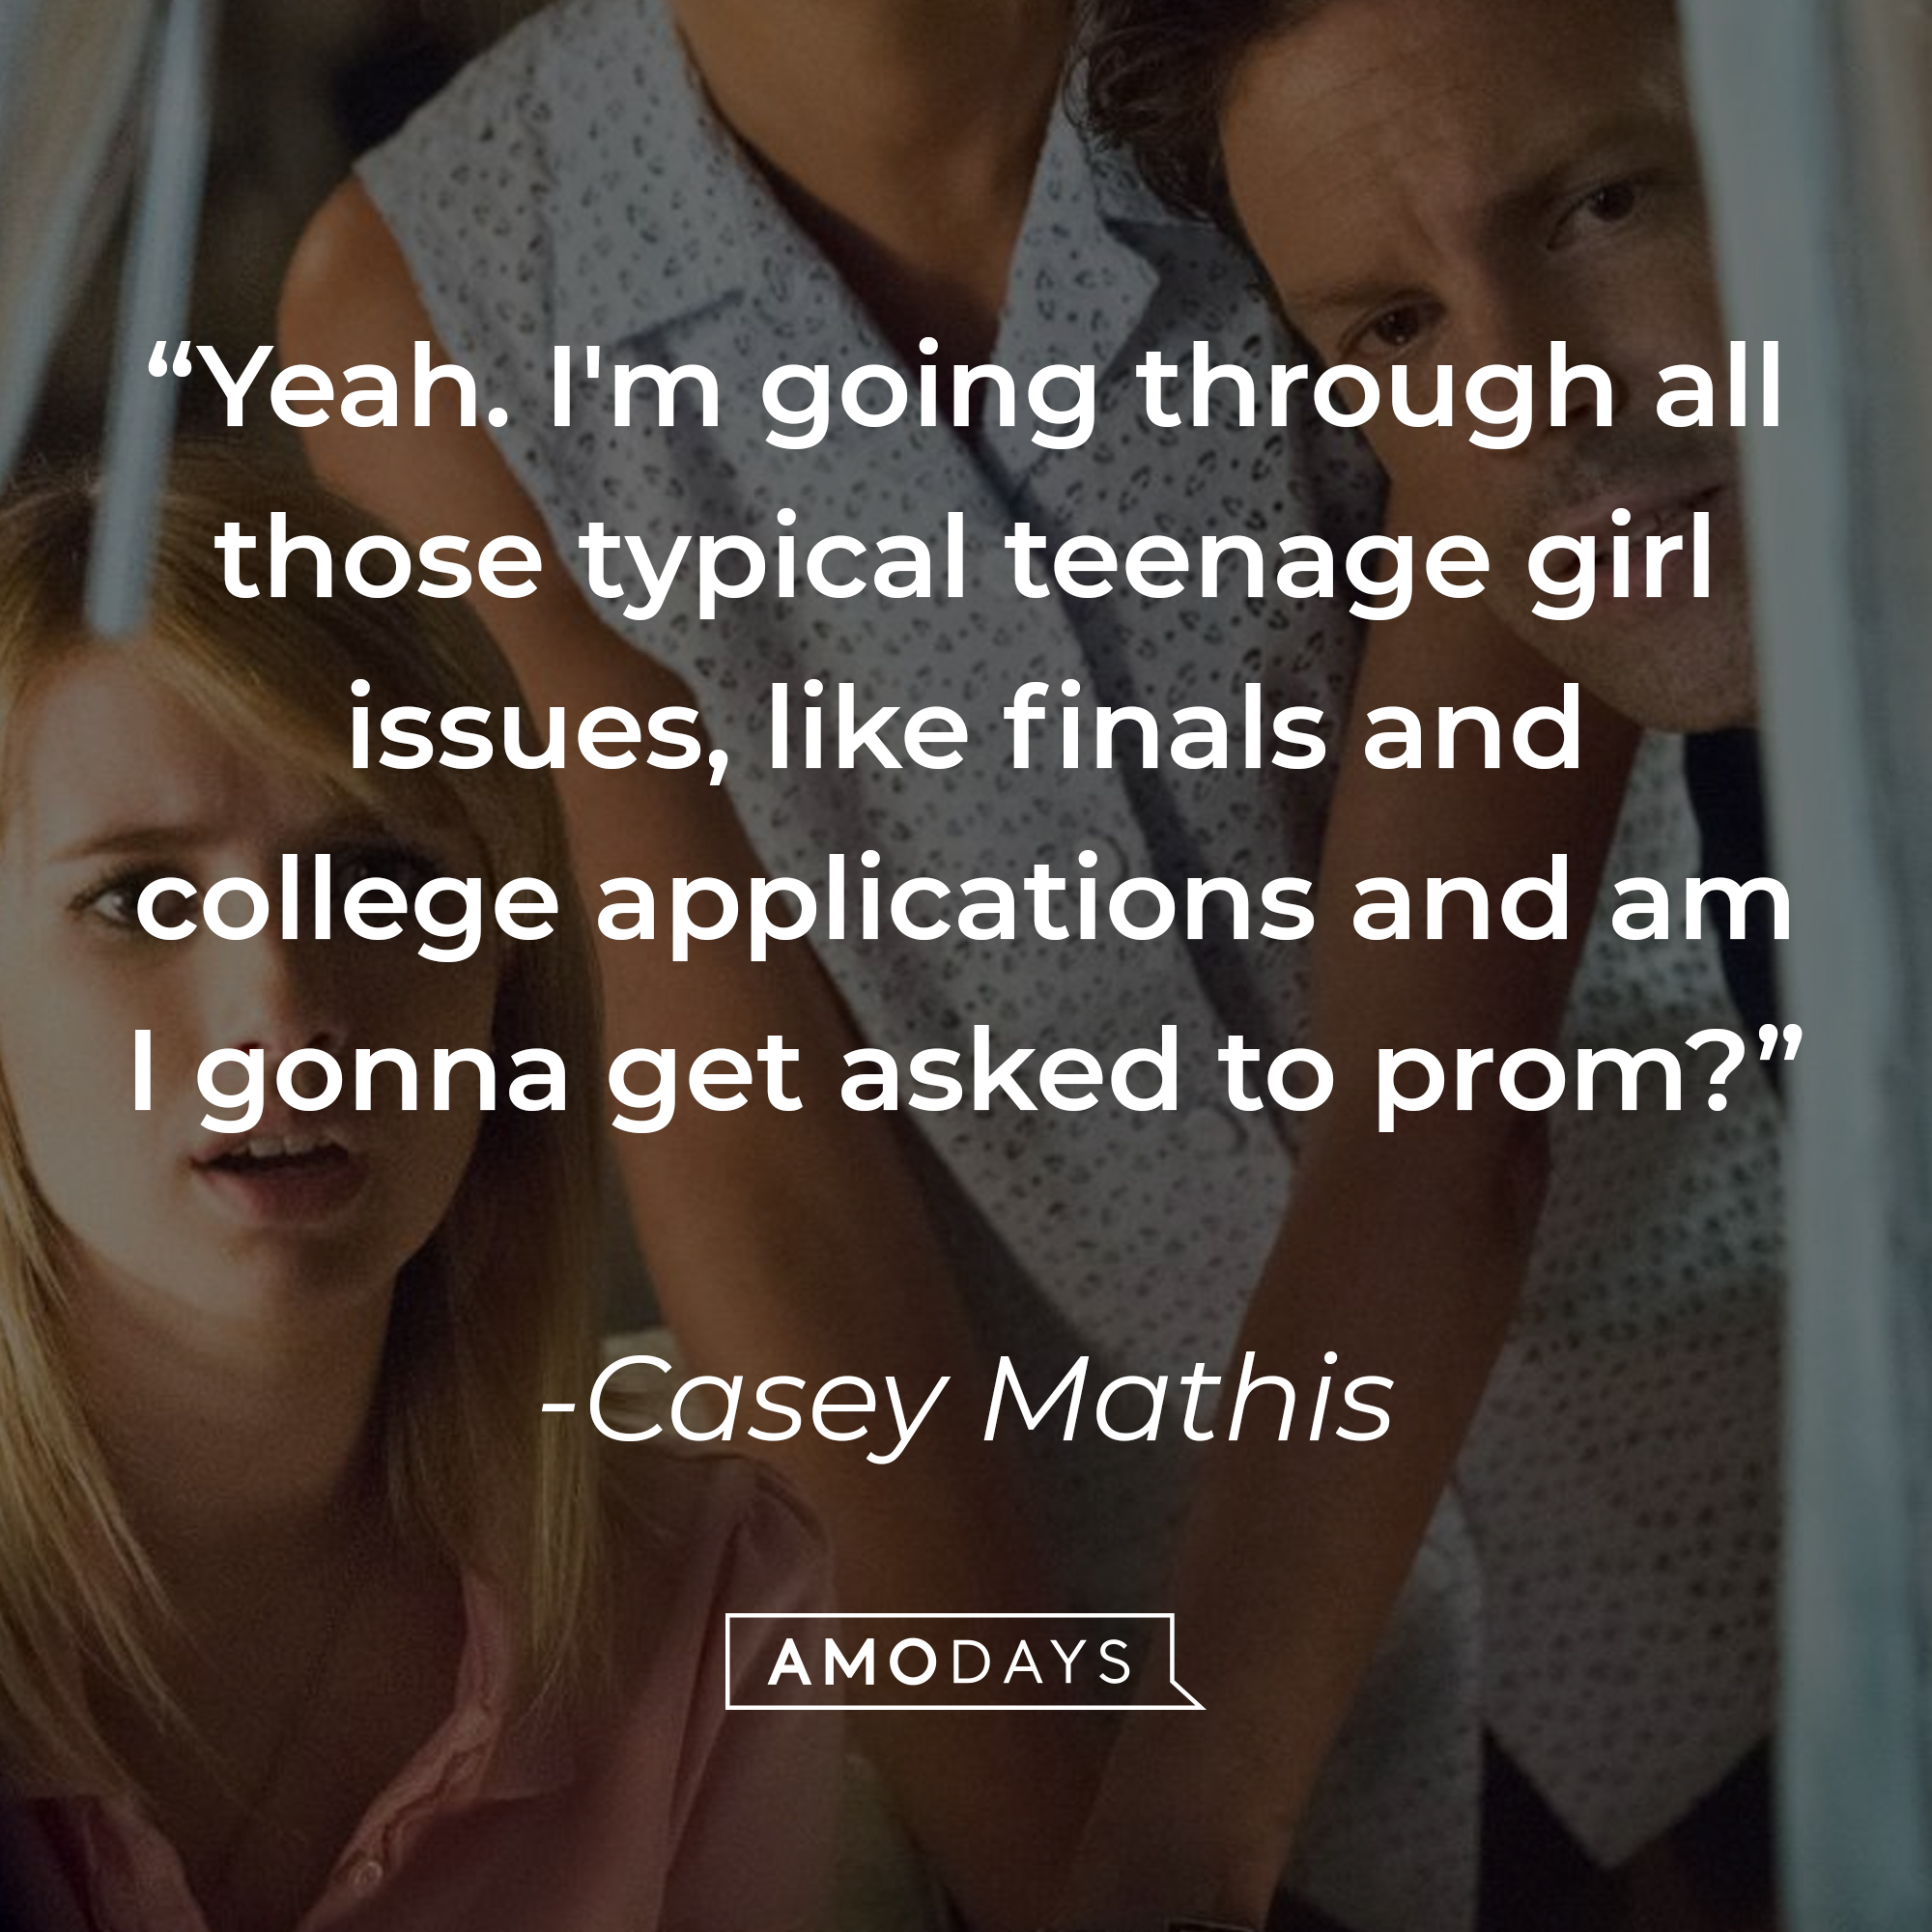 Casey Mathis' quote: “Yeah. I'm going through all those typical teenage girl issues, like finals and college applications and am I gonna get asked to prom?” | Source: facebook.com/WereTheMillersUK